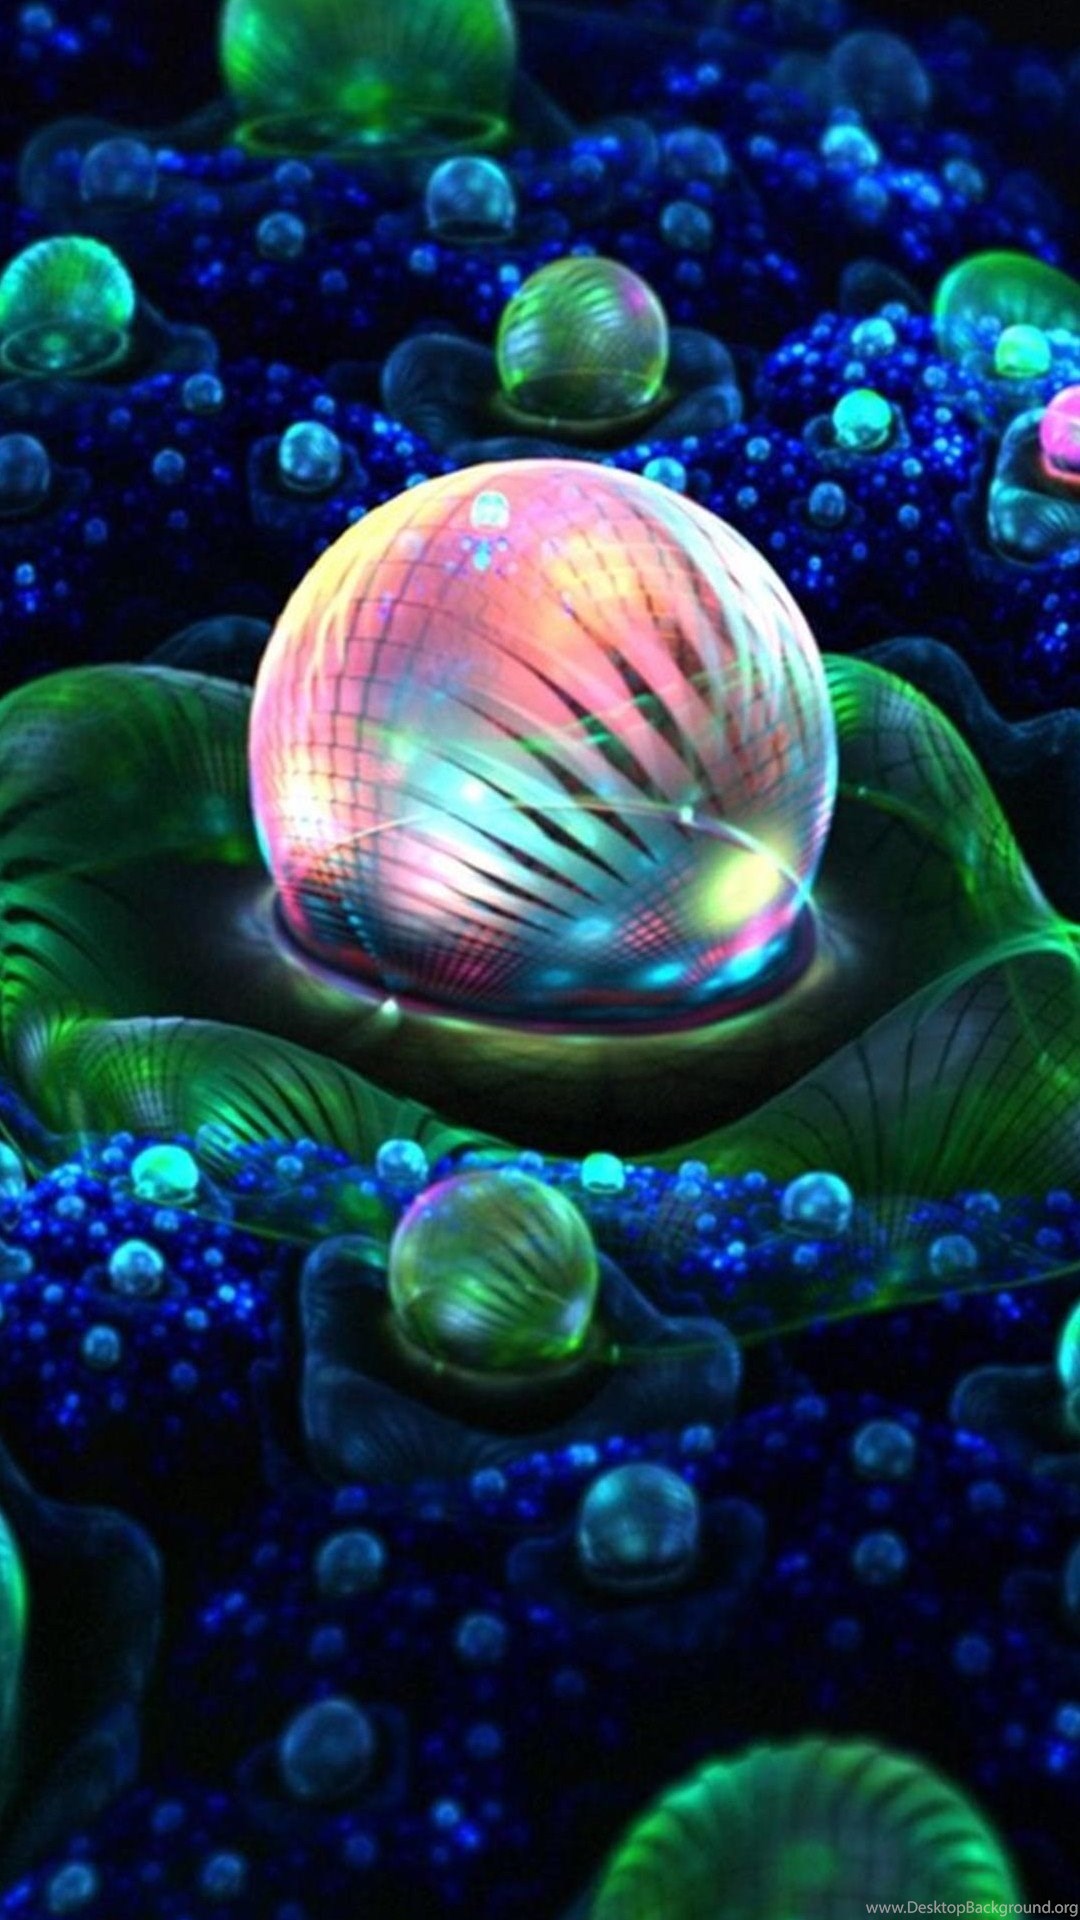 Android 3d Wallpapers Hd 06 Android Wallpapers Phone Wallpapers Desktop Background